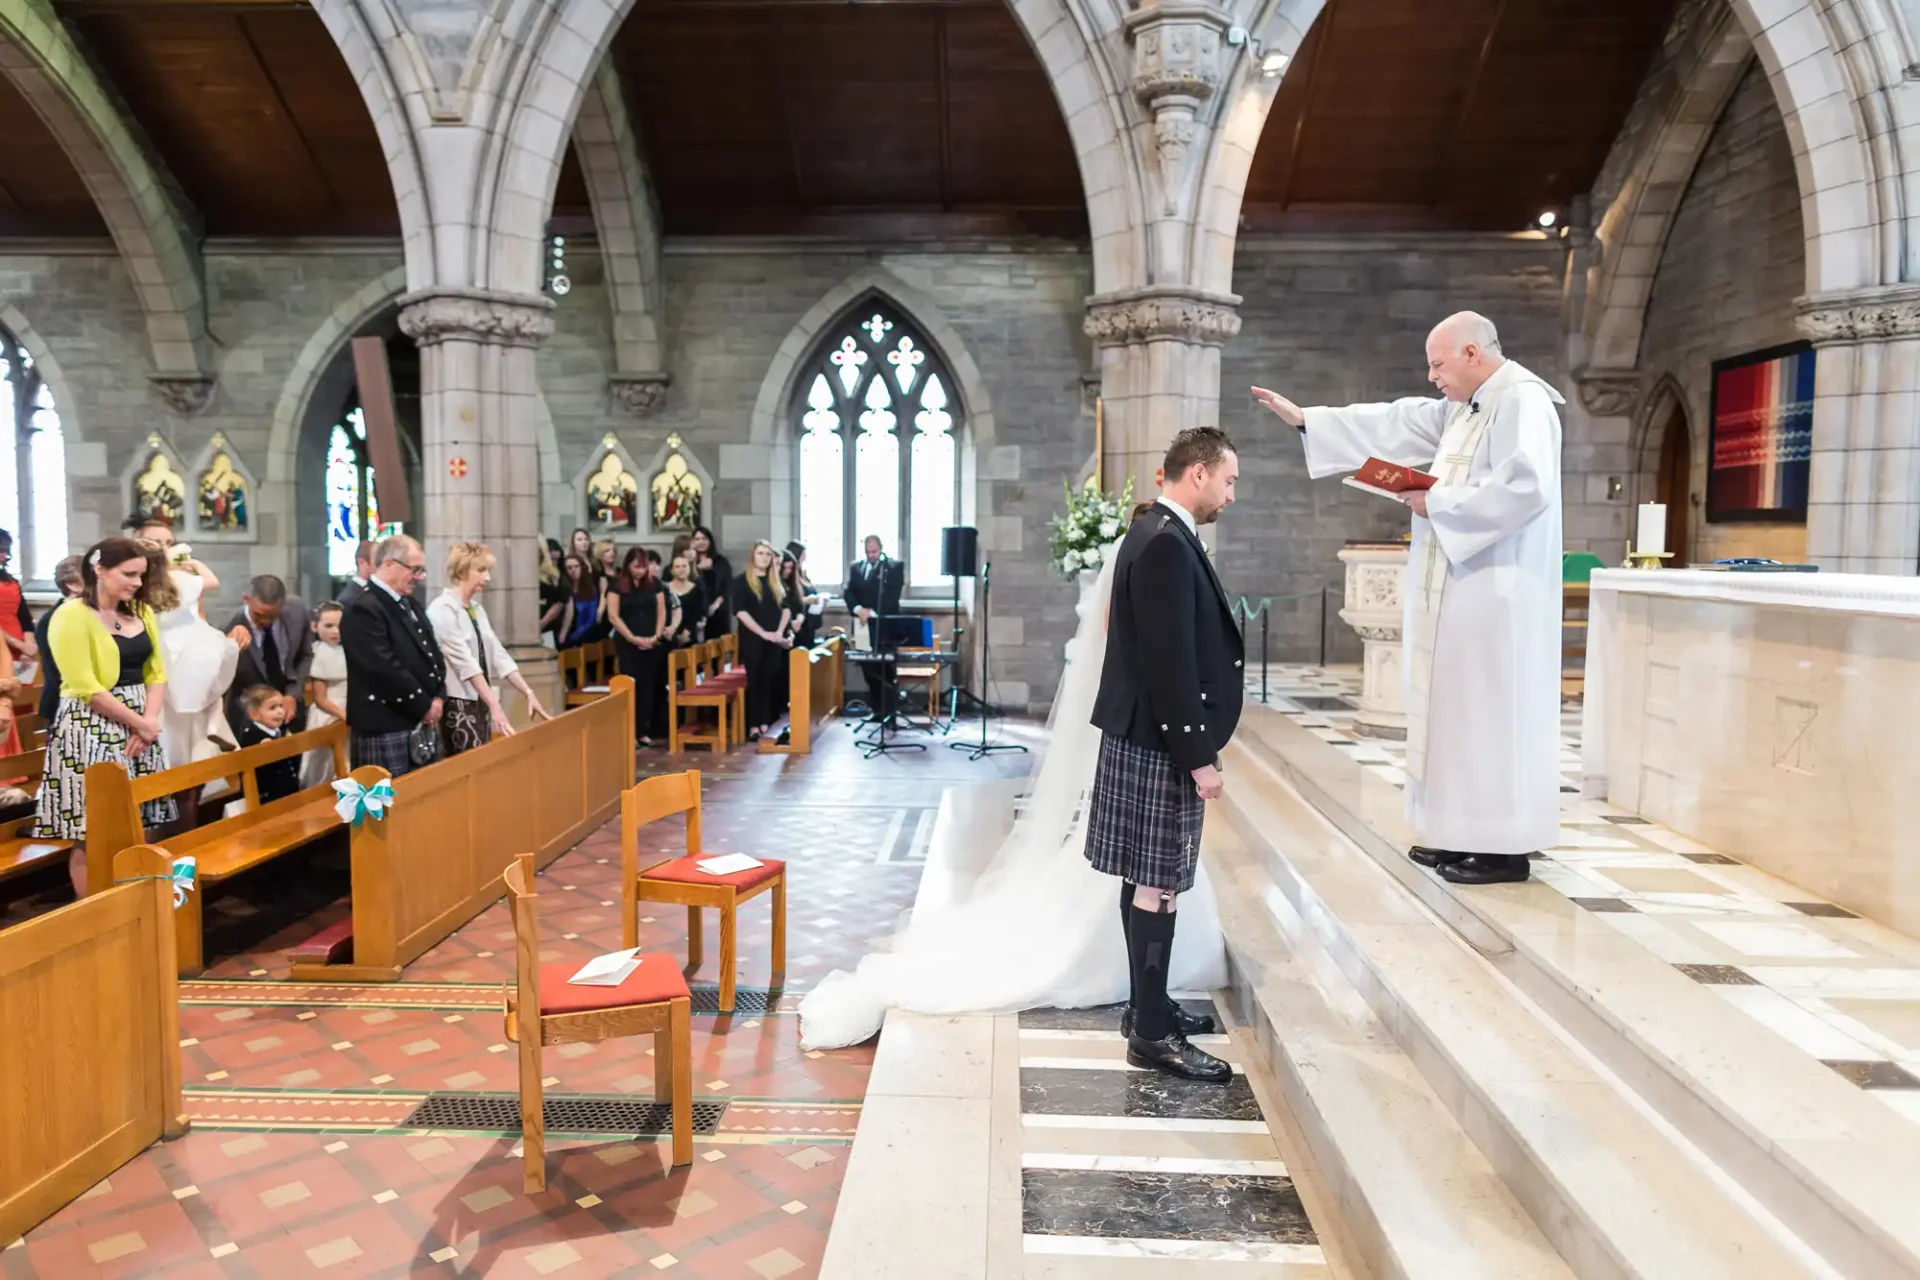 A wedding ceremony in a church with a priest speaking to a groom in a kilt, surrounded by guests seated in pews.